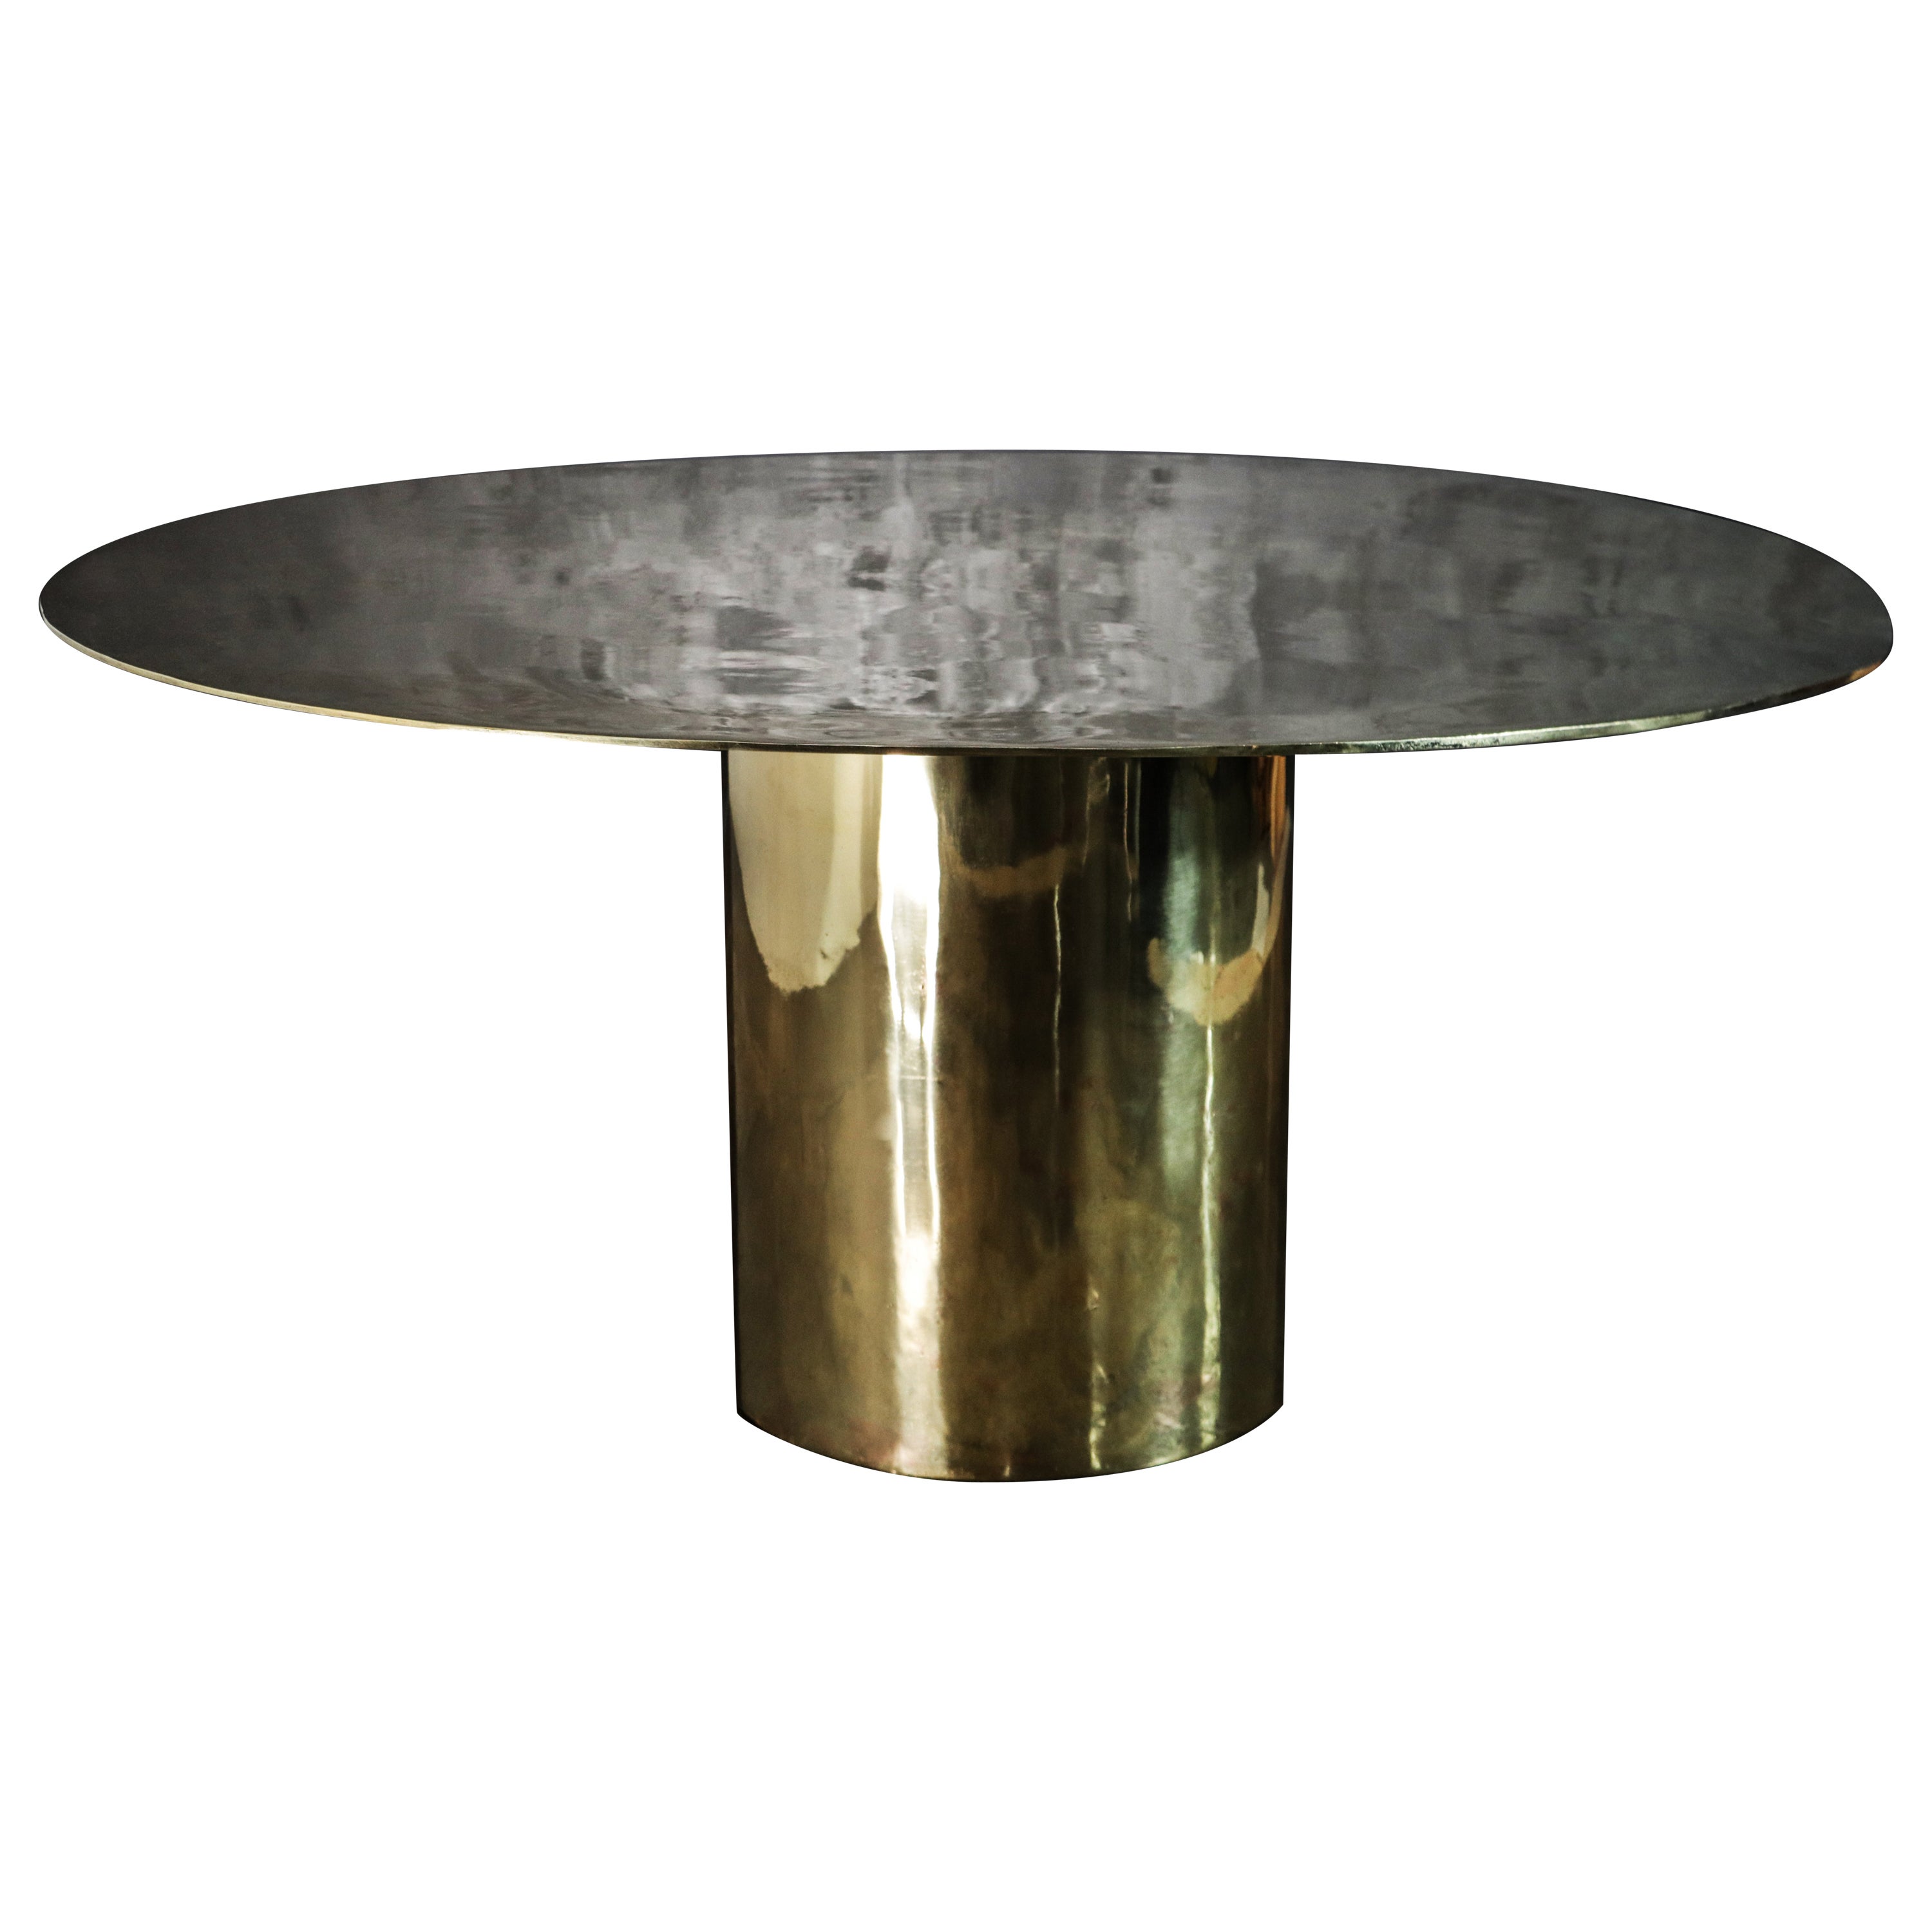 Cast Bronze Functional Art Sculptural Pedestal Dining Table from Costantini For Sale